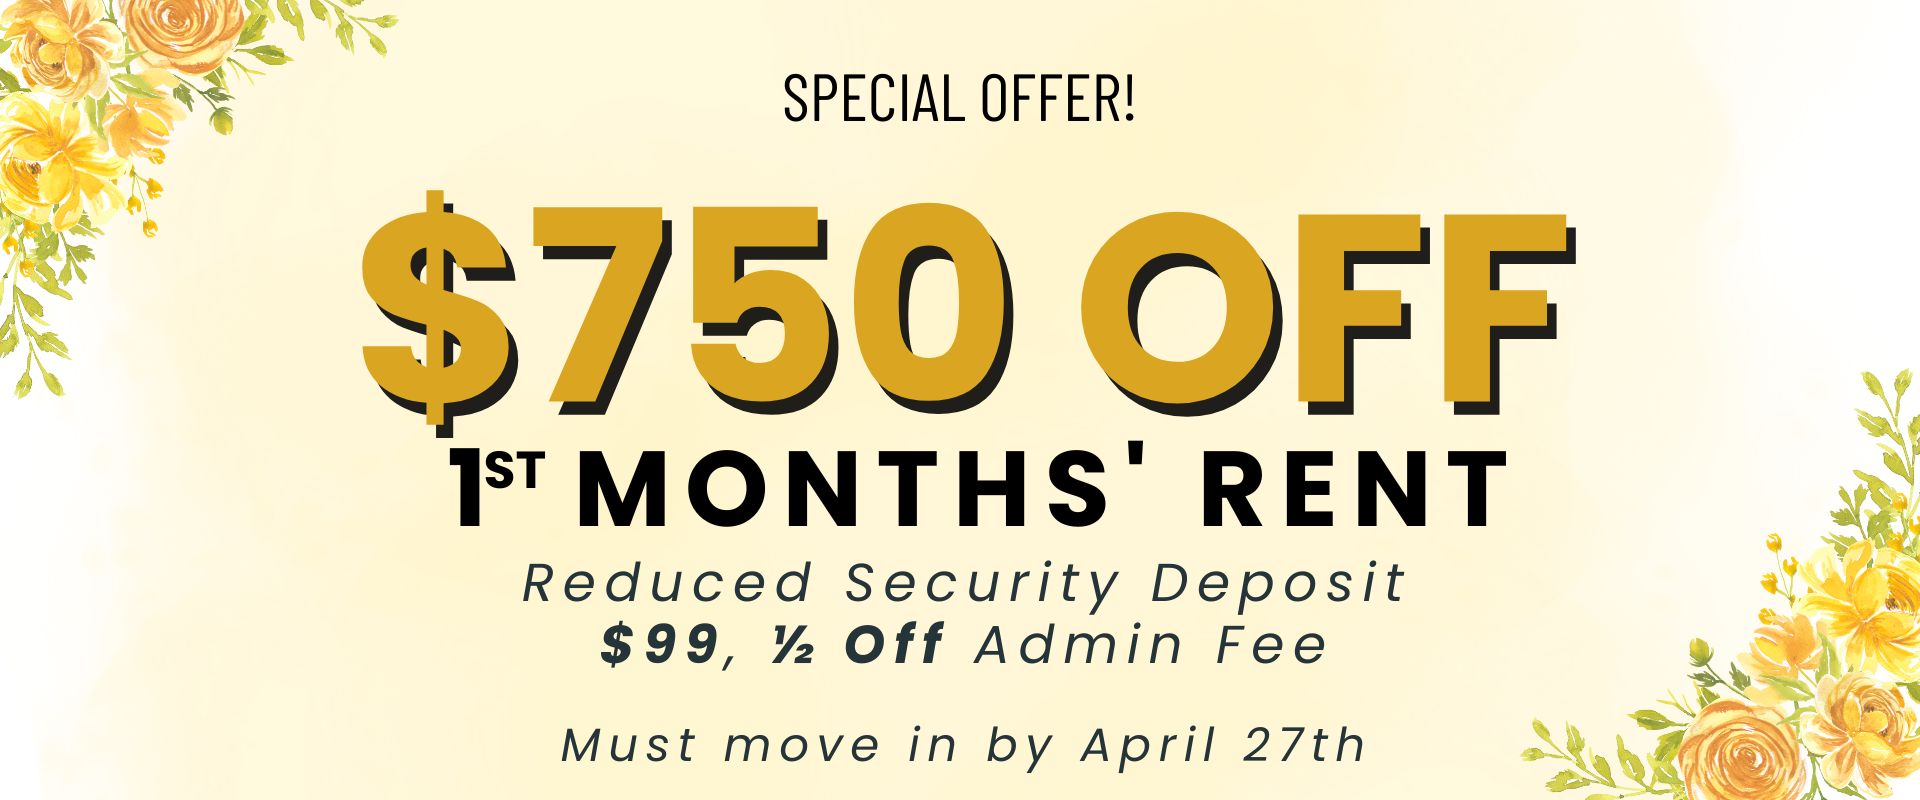 $750 off 1st months' rent, reduced security deposit, $99, ½ off admin fee.  Must move in by April 27th.